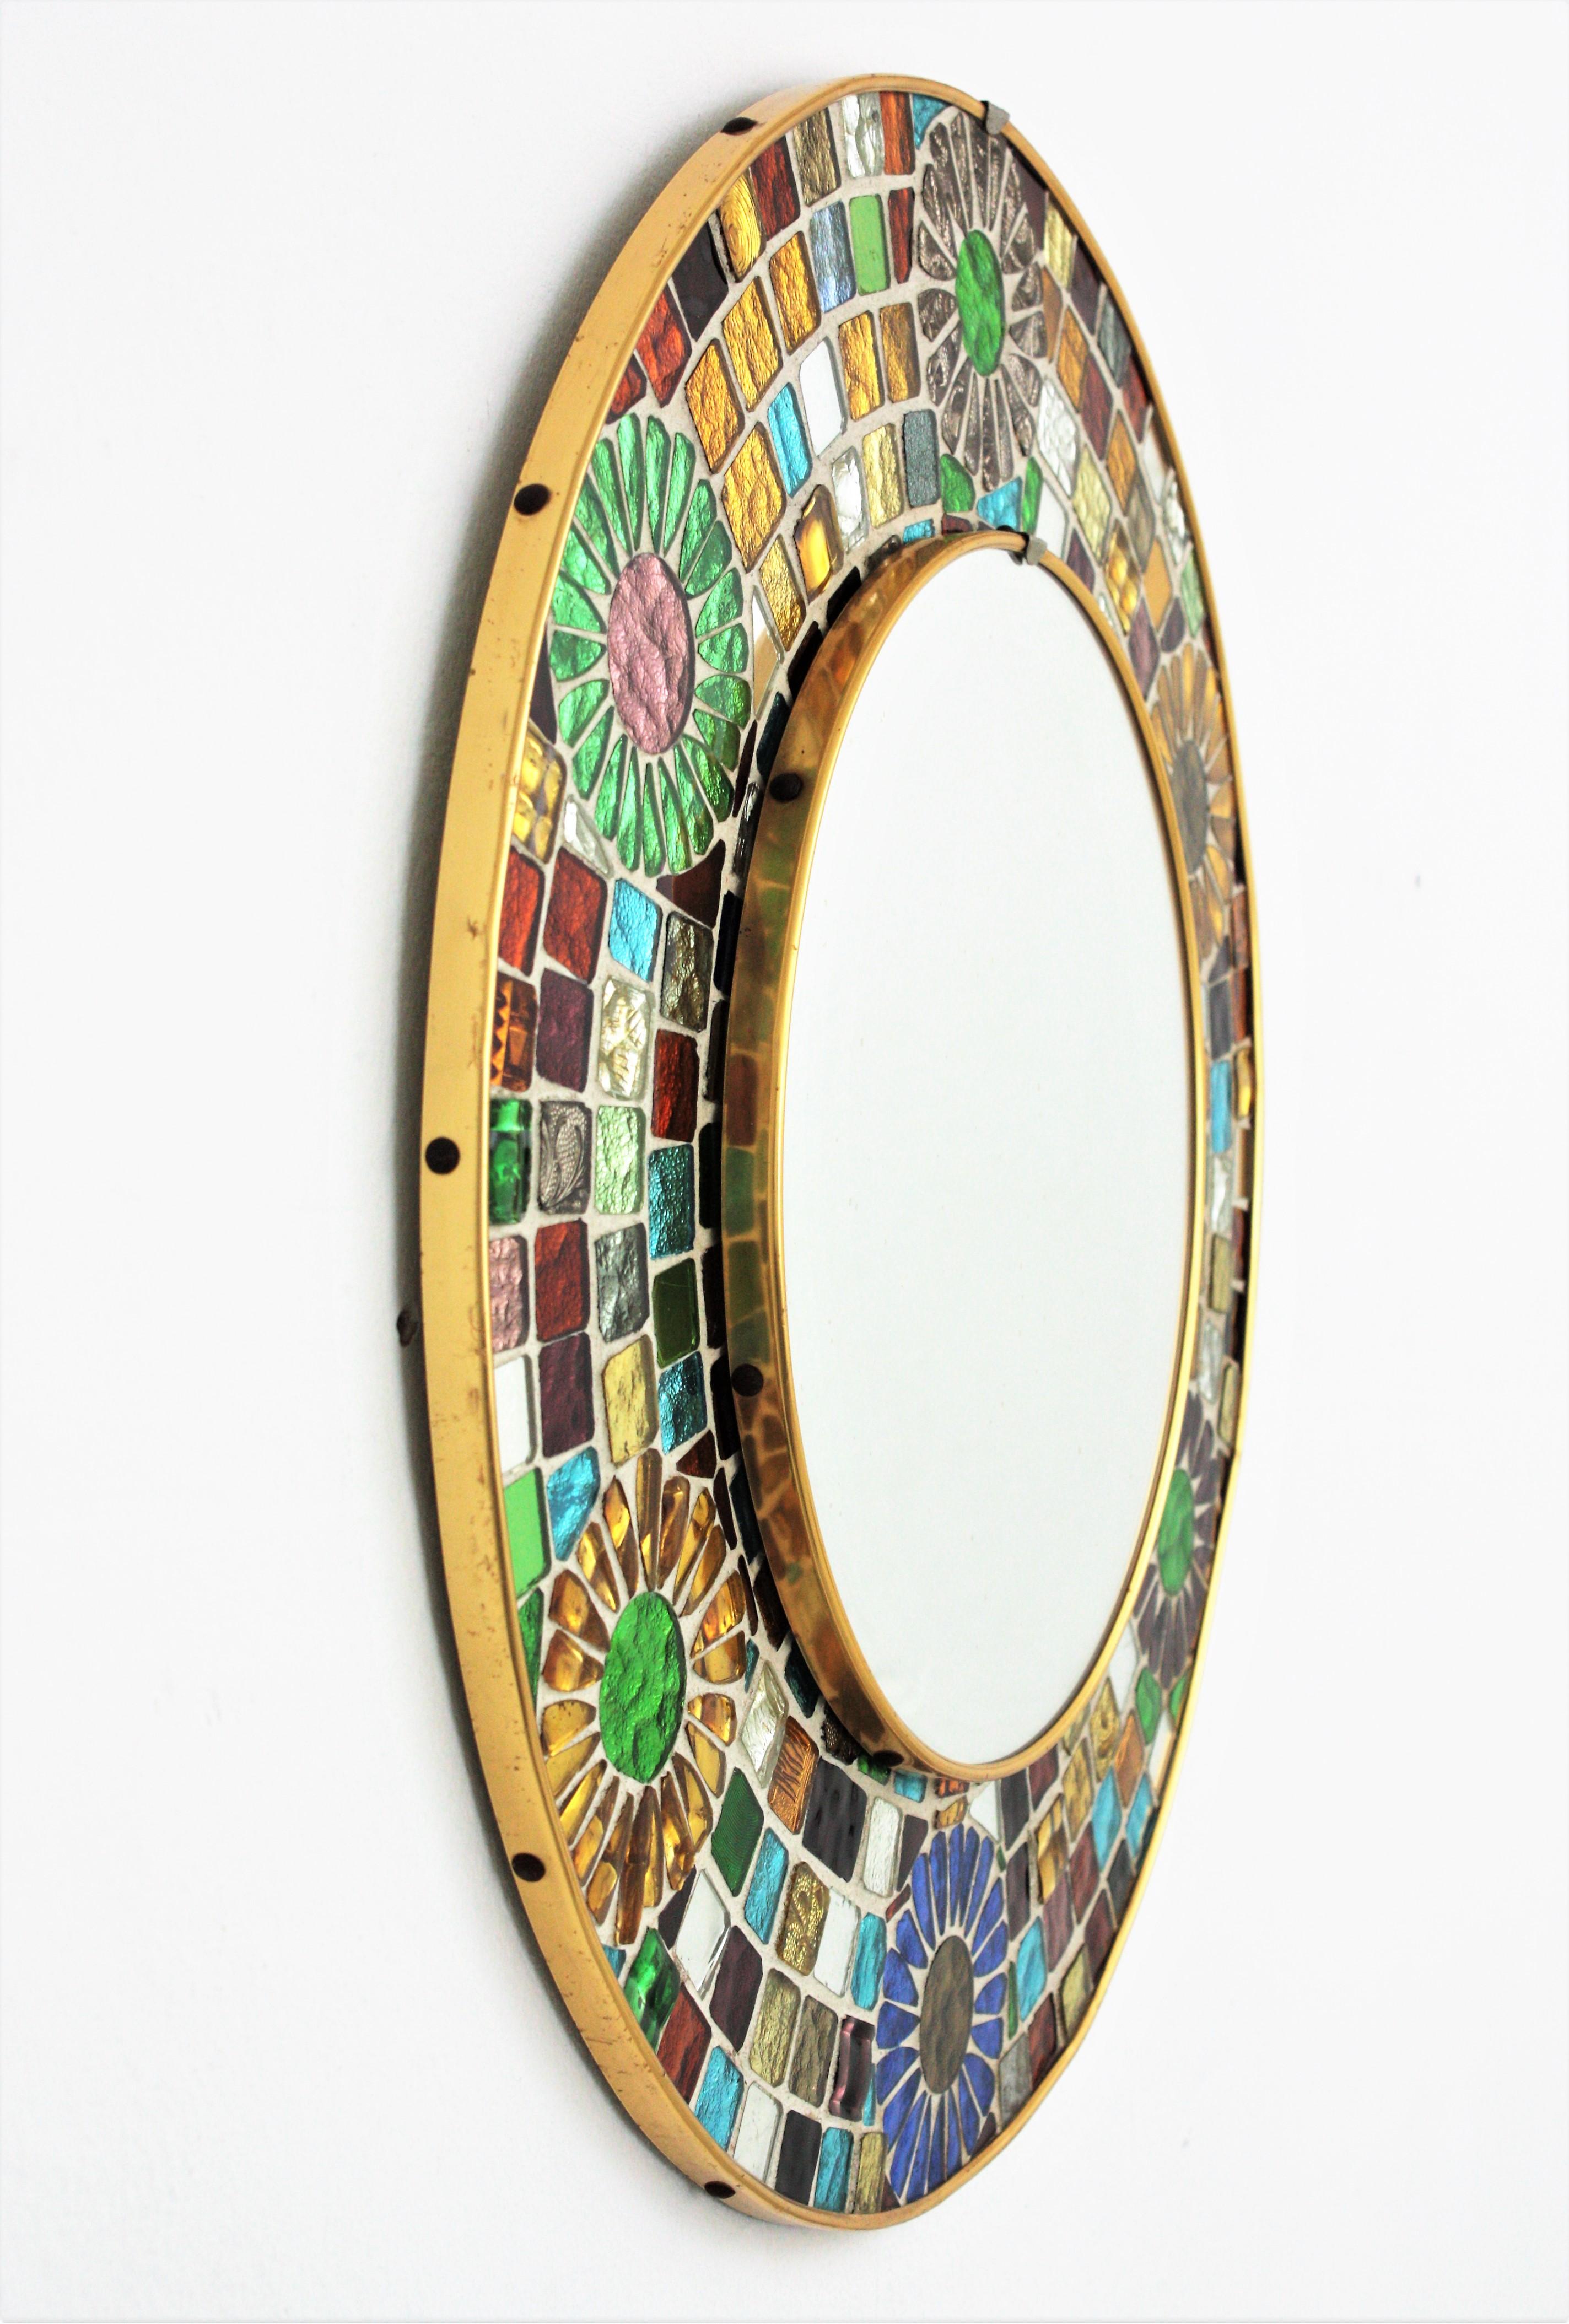 Spanish Multicolor Round Wall Mirror with Glass Mosaic Frame and Flower Accents